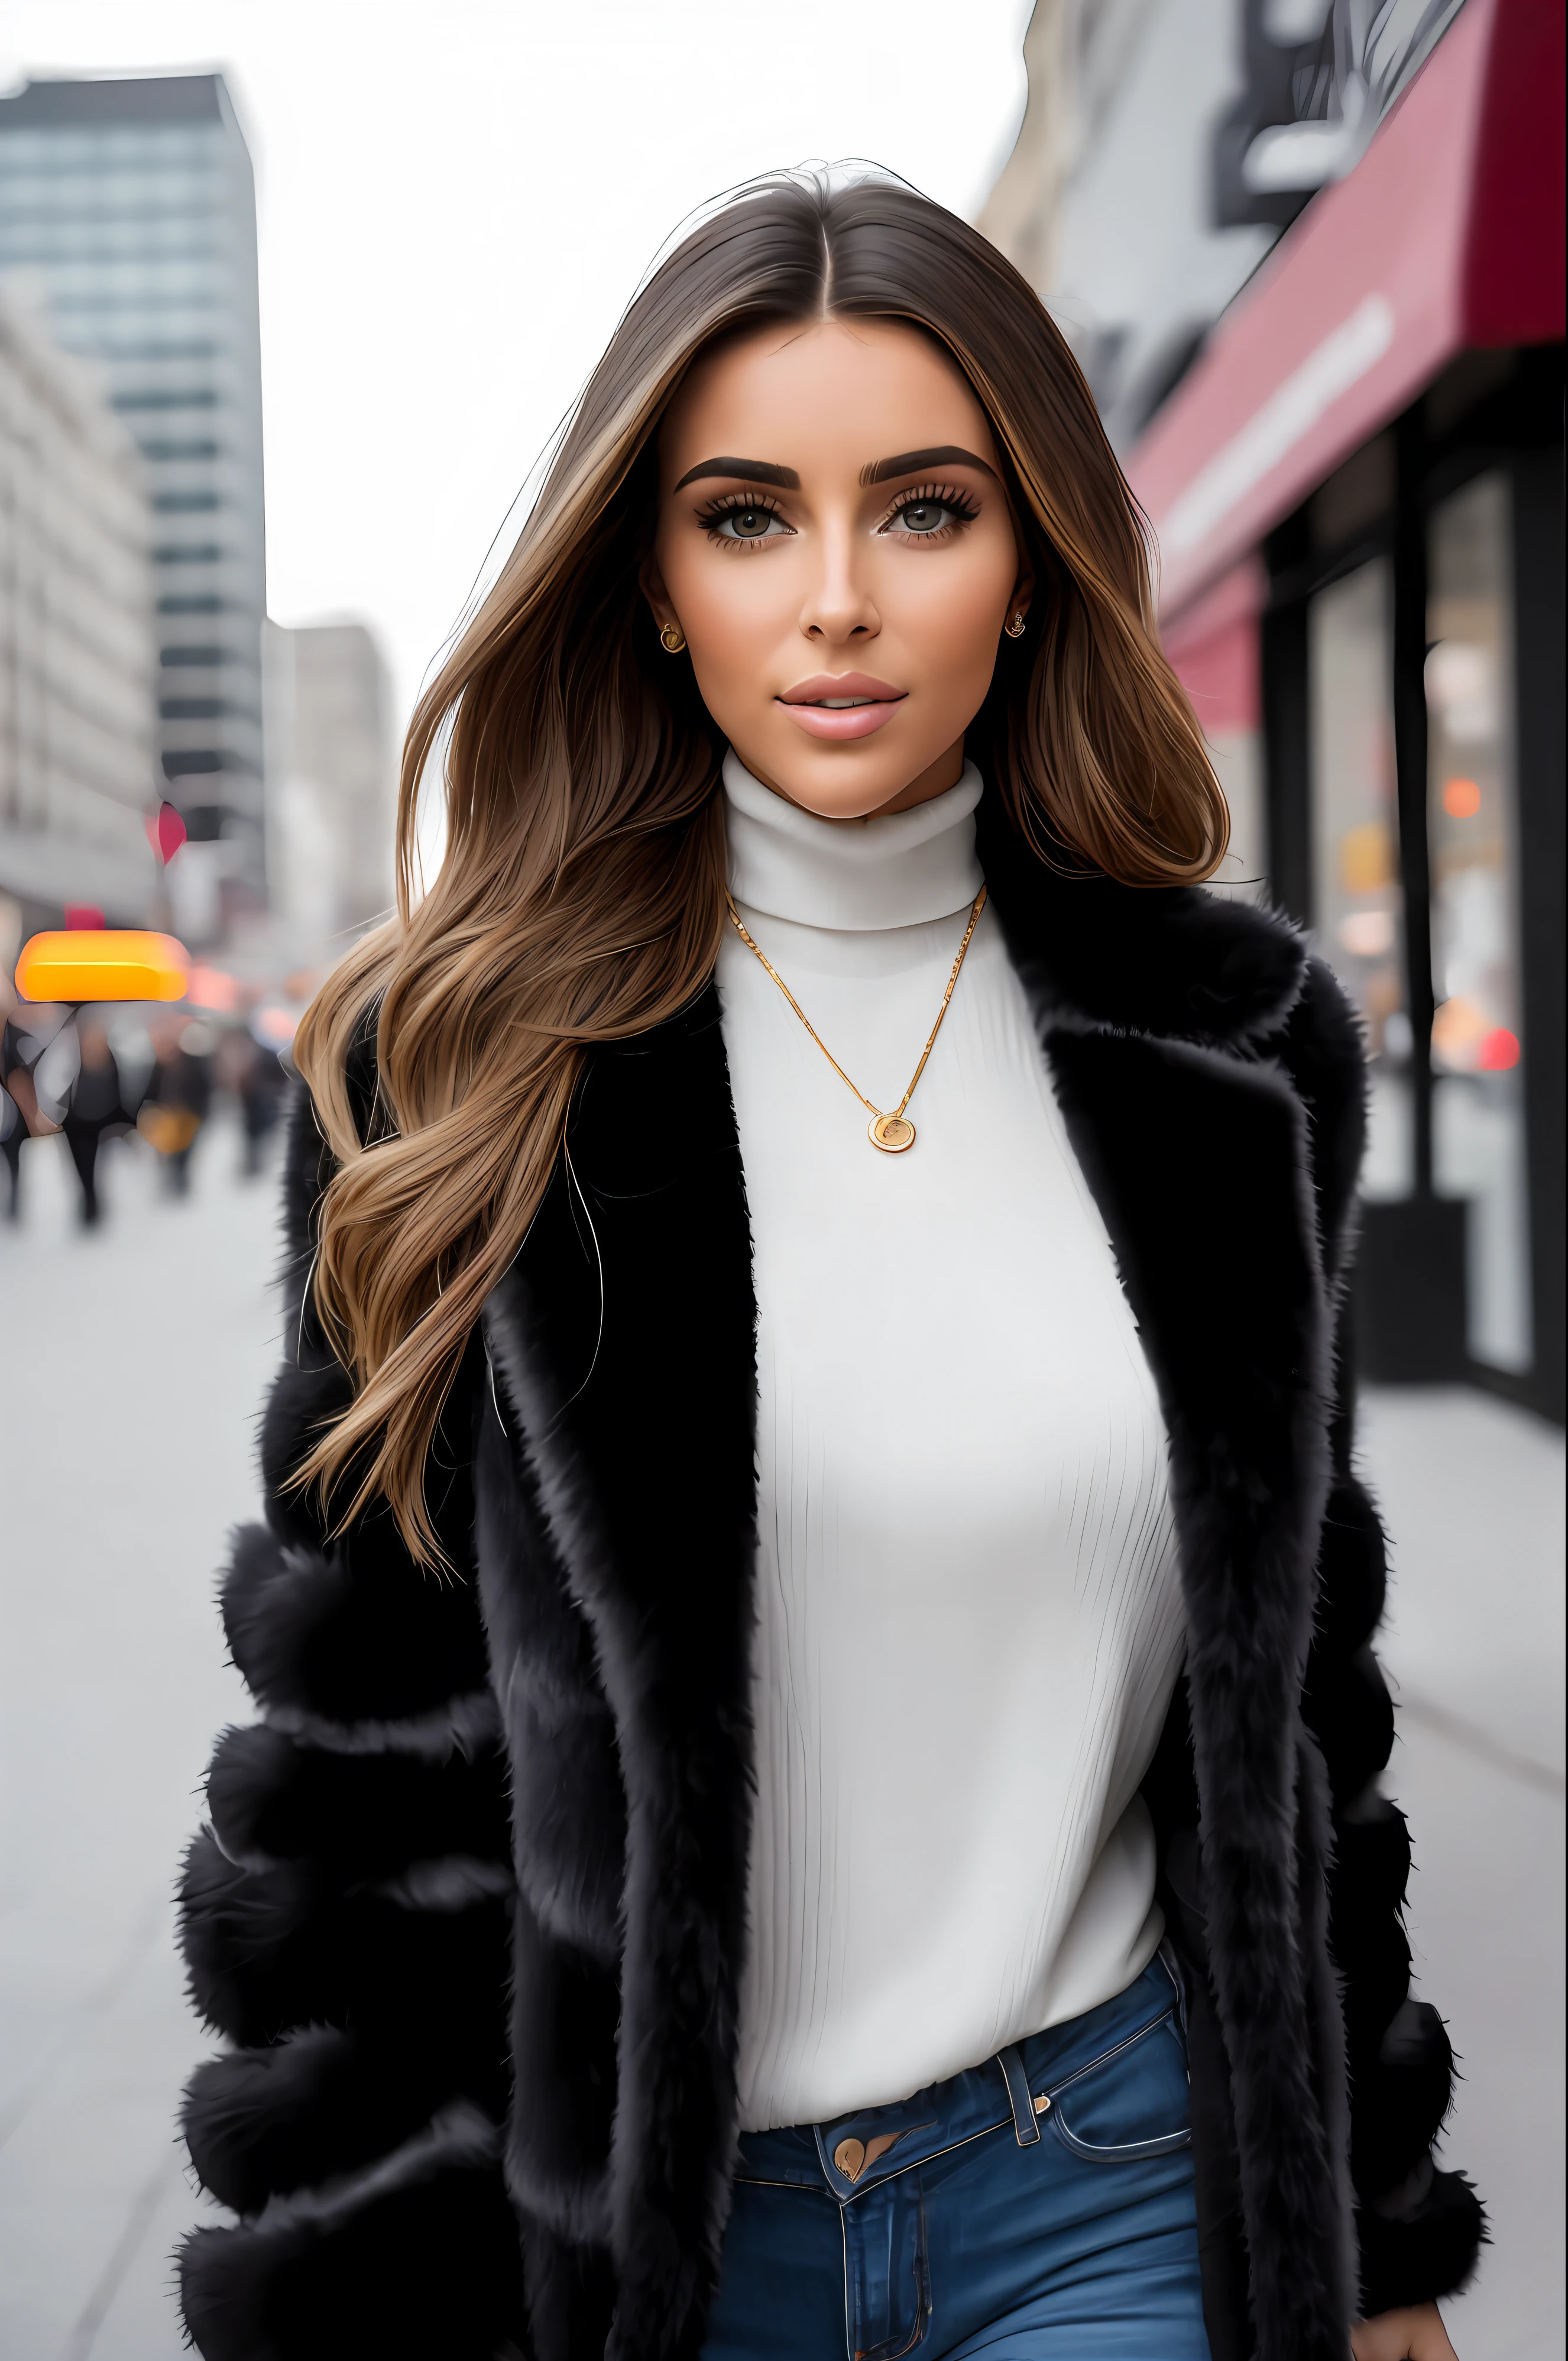 A woman wearing a black turtleneck sweater with a black fur coat, gold ring, brunette with dyed blonde hair, Julia Sarda, Christina Kritkou, black turtleneck, wearing turtleneck and jacket, portrait of Kim Kardashian, inspired by Gina Pellón, tanned Ameera al Taweel, Olivia Culpo, Julia Fuentes, flawless olive skin ((detailed face)),  ((detailed facial features)), (finely detailed skin), pale skin, walking through the city, megacity environment, New York City in the background, (cool colors), damp, damp, reflections, (masterpiece) (perfect aspect ratio)(realistic photo)(best quality) (detailed) photographed on a Canon EOS R5, 50mm lens, F/2.8, HDR, (8k) (wallpaper) (cinematic lighting) (dramatic lighting) (sharp focus) (intricate),  RAW photo, RAW photo, gigachad photo, posing for camera, 8k uhd, dslr, high quality, grain film, Fujifilm XT3, film stock photography 4 kodak portra 400 camera f1.6 lens rich colors hyper realistic texture dramatic lighting unrealengine trend in artstation cinestill 800 tungsten, toughboy style, face ultra focus, intimidating